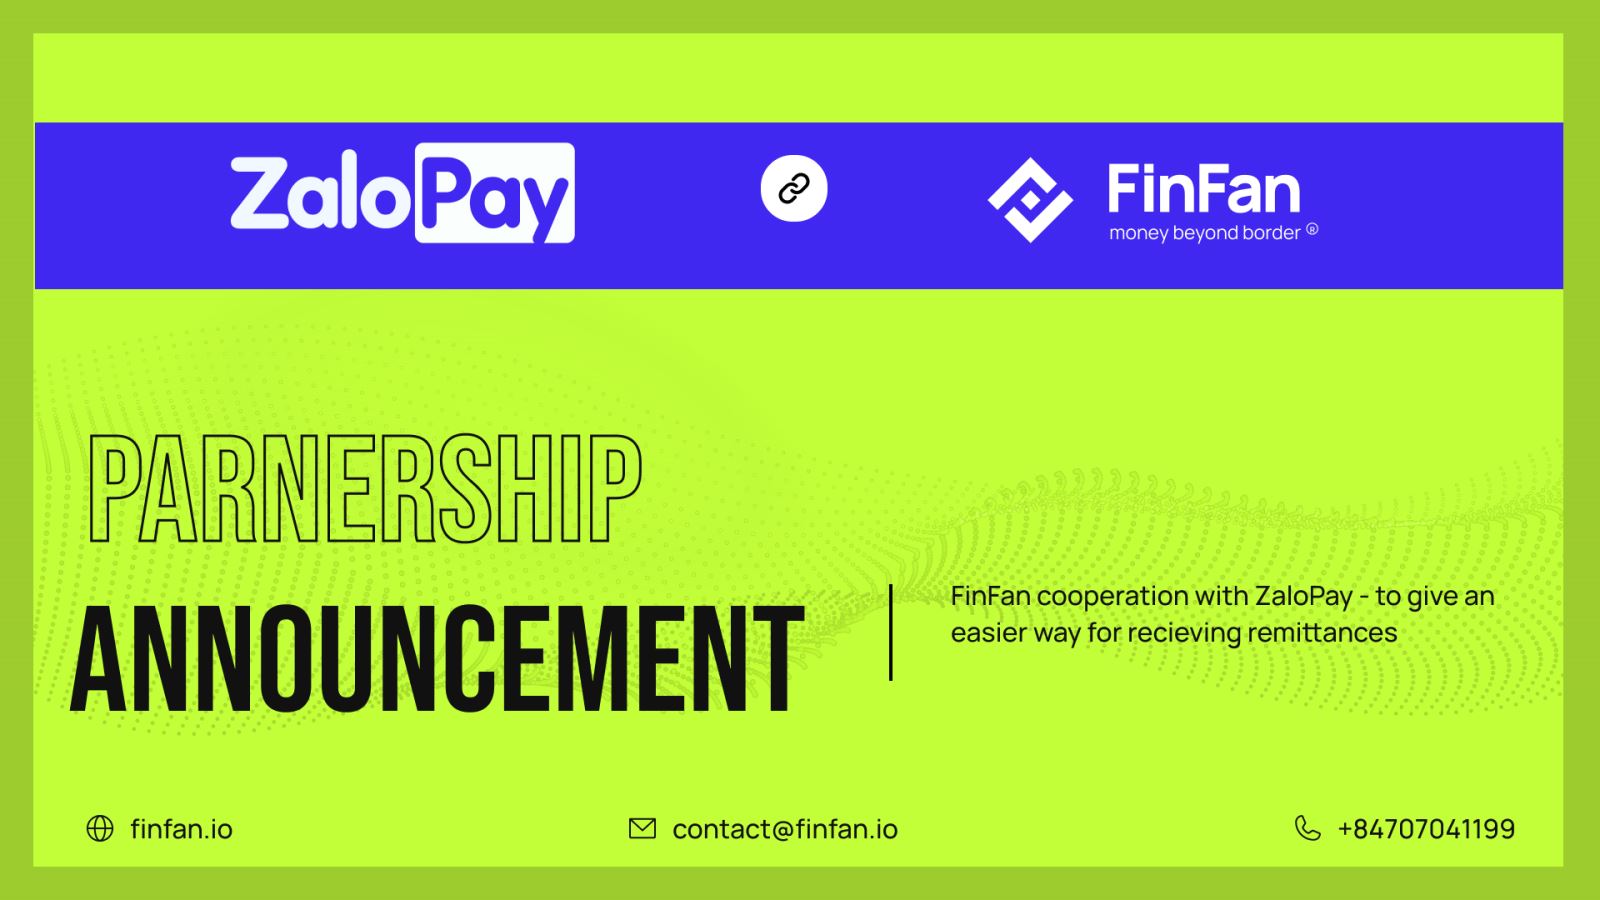 FinFan cooperation with ZaloPay - to give an easier way for recieving remittances